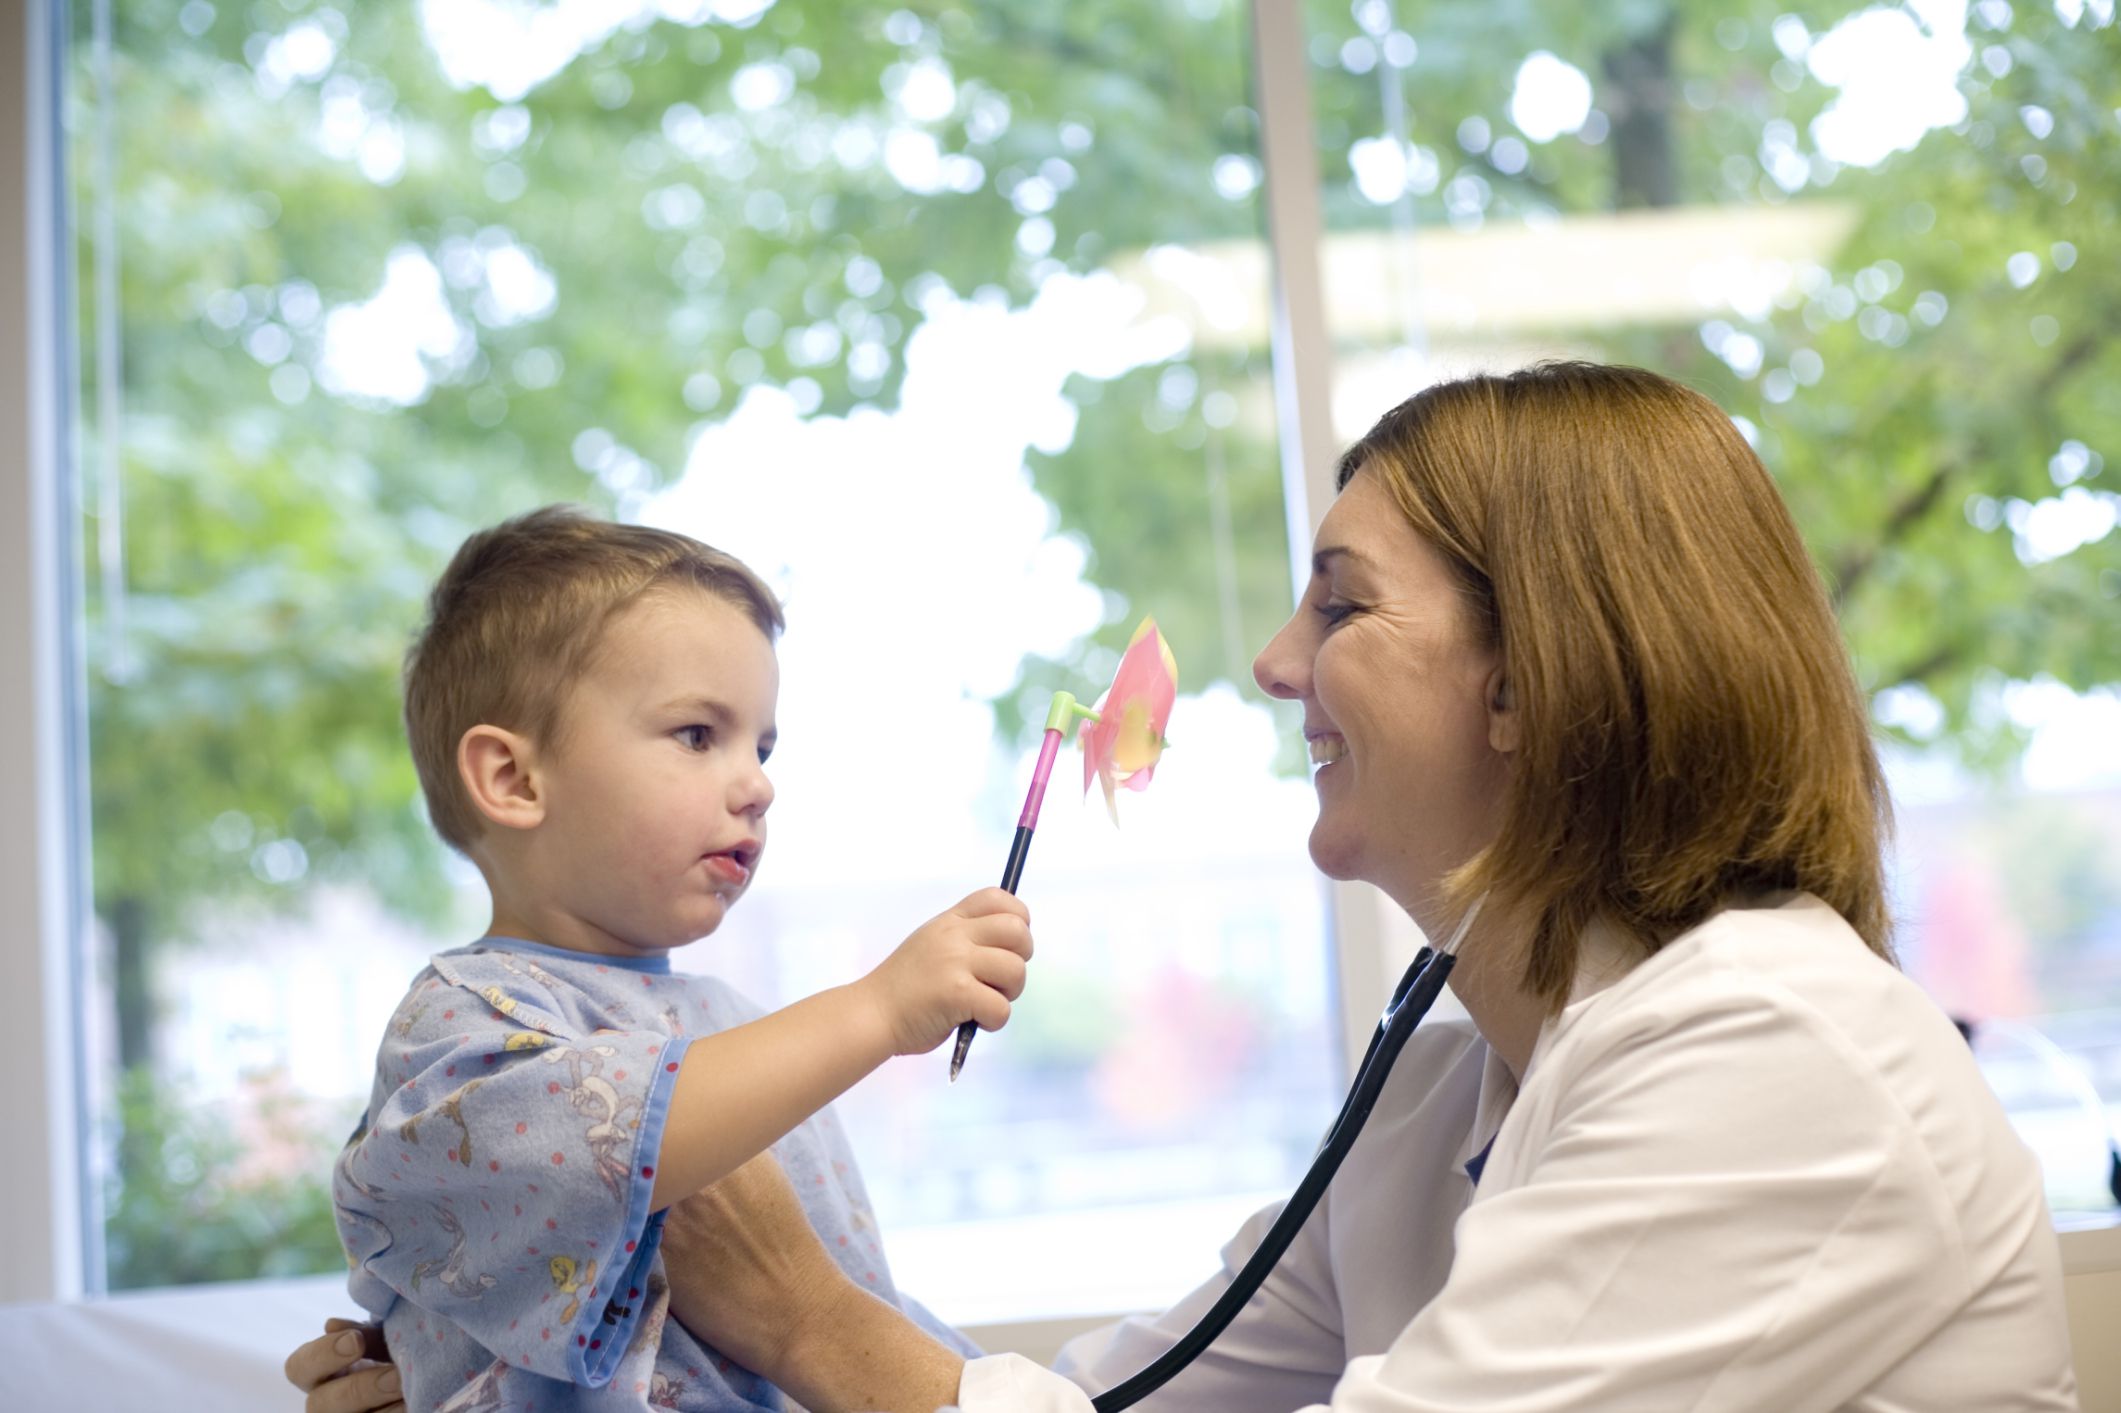 Signs of Autism Your Pediatrician May Miss